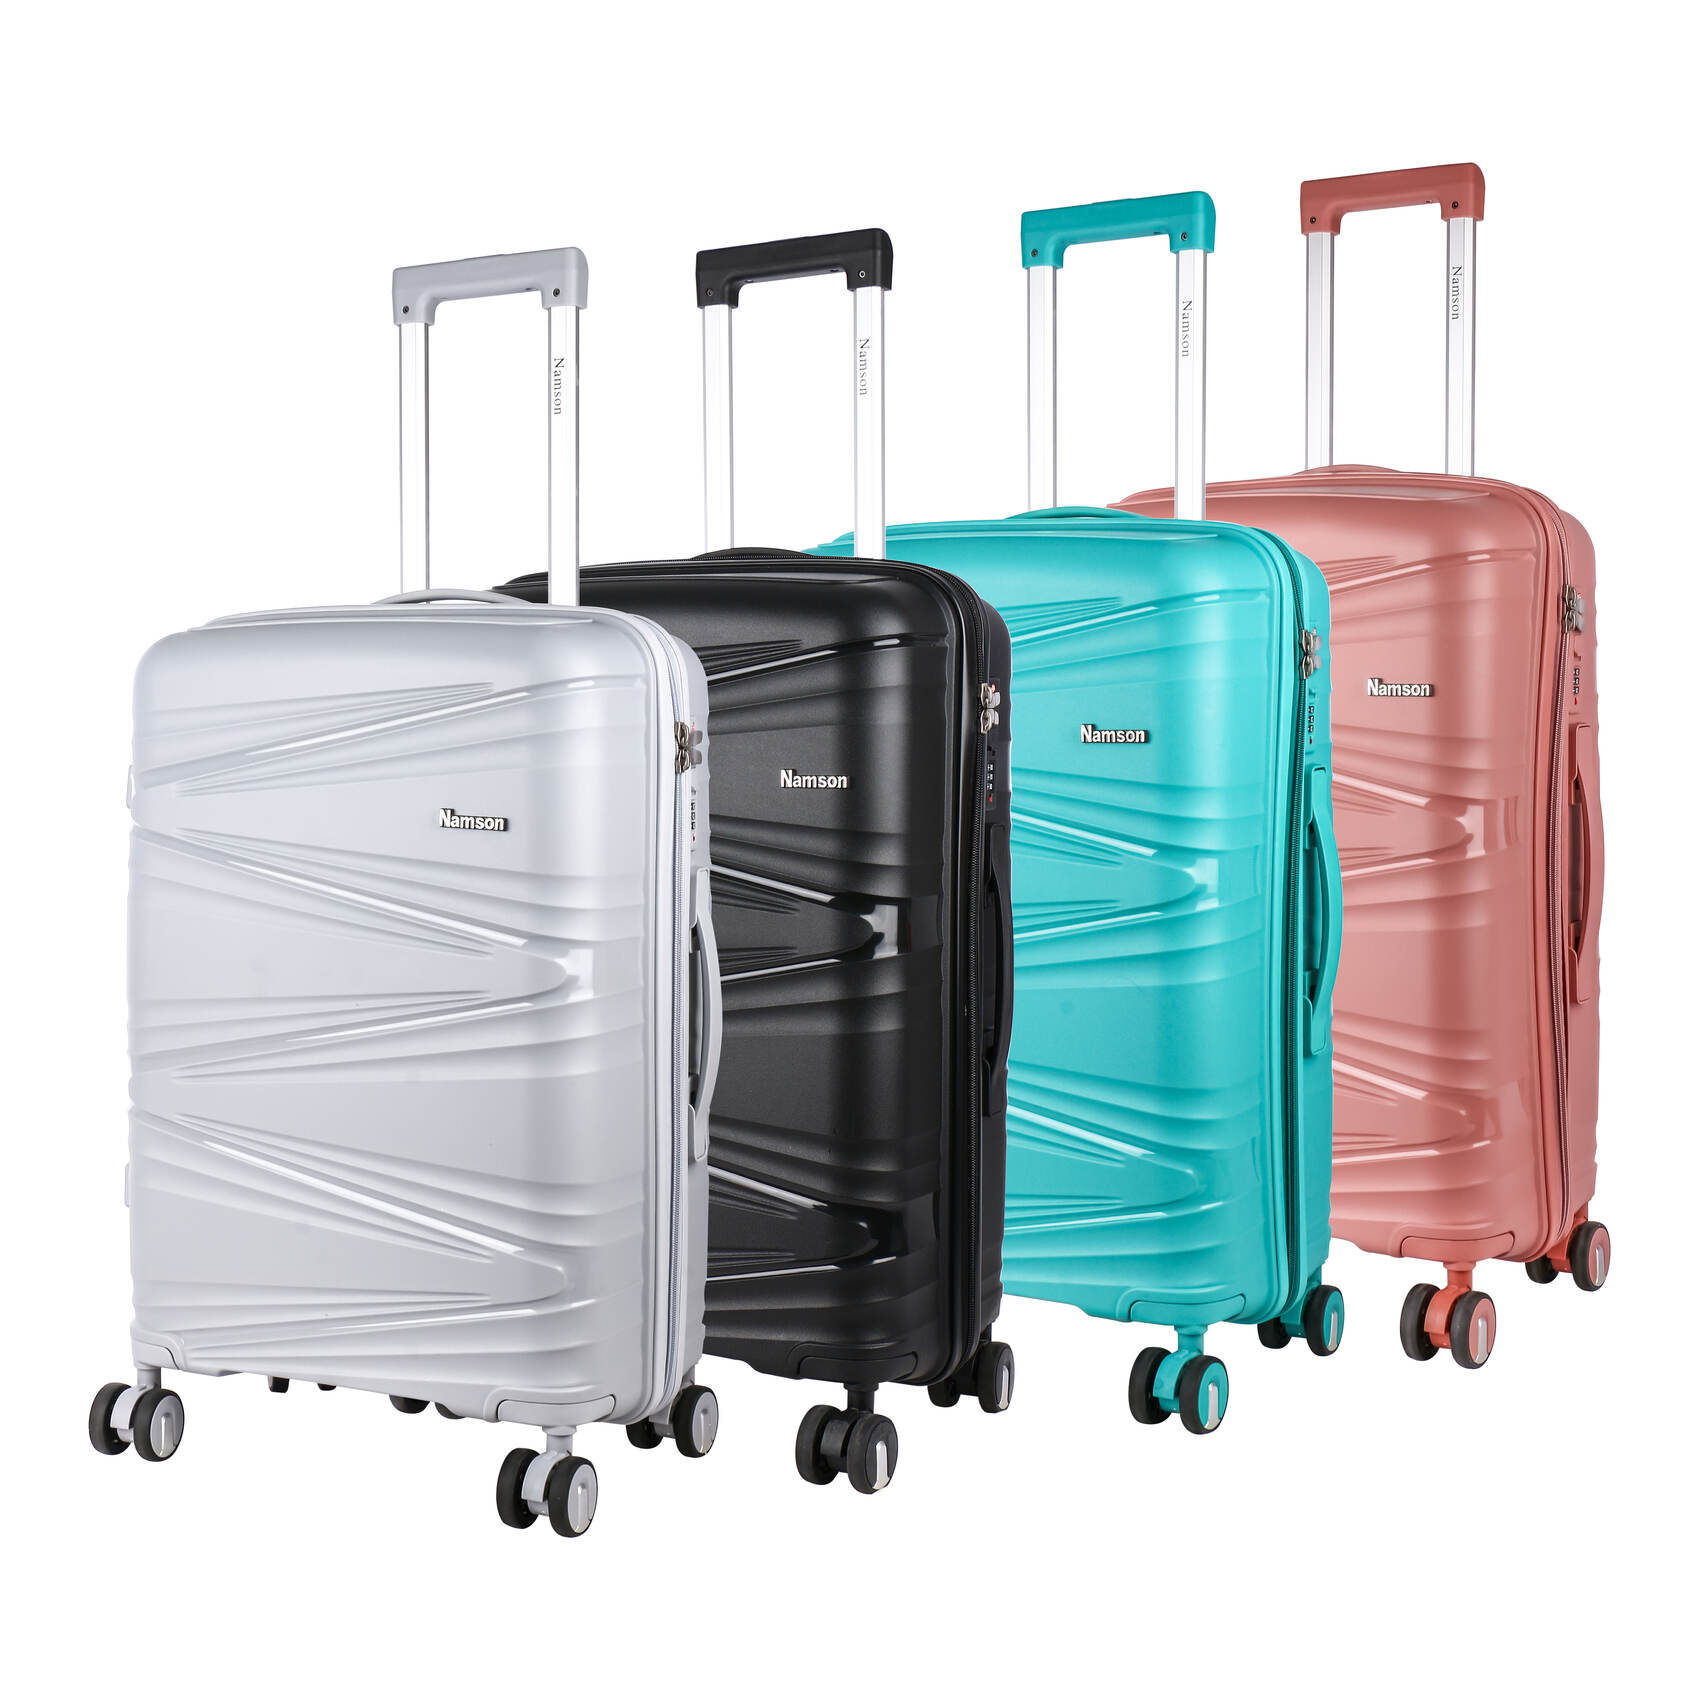 NAMSON 24 INCH LUGGAGE TROLLEY SUITCASE 65L | 10 - 15 KG WITH TELESCOPIC HANDLE NA-7869-24 | LIGHT WEIGHT  | WATER RESISTANT | PREMIUM QUALITY | FLEXIBLE | 360 SPINNING 4 DOUBLE WHEELS | NON BREAKABLE | DOUBLE ZIPPER | MULTIPLE LOCKING SYSTEM